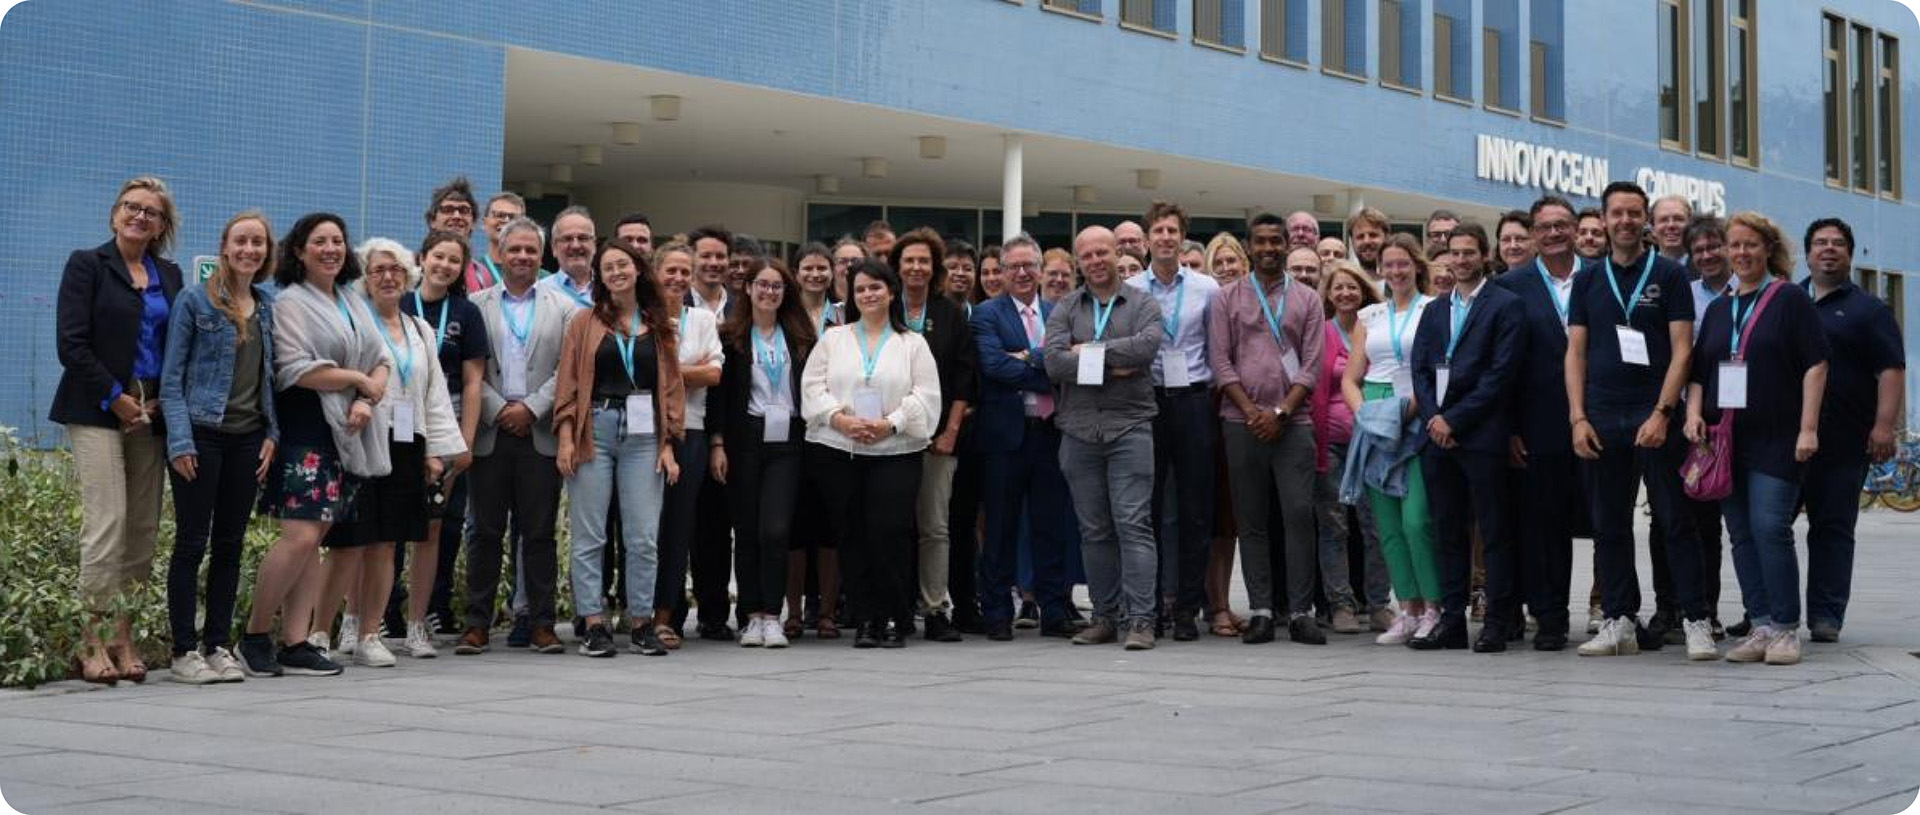 Last week the INSPIRE Europe consortium kicked off the start of a new four-year project. 25 partners spread across Europe and one partner from Thailand will join forces to reduce the plastic pollution in European rivers.